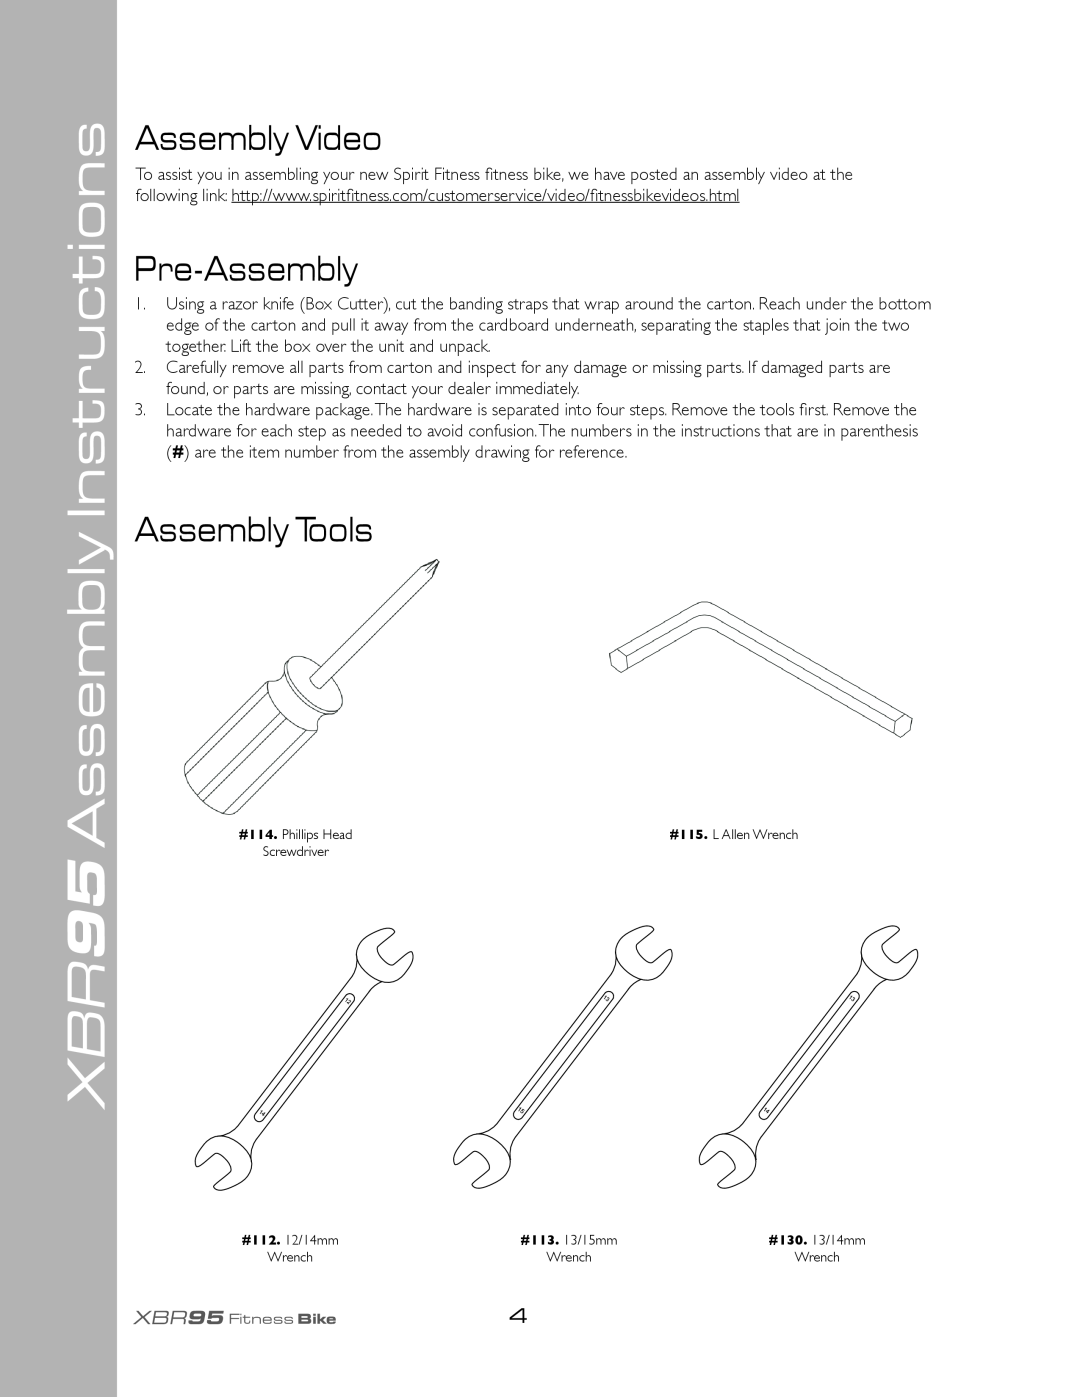 Spirit owner manual XBR95 Assembly Instructions, Assembly Video, Pre-Assembly, Assembly Tools 